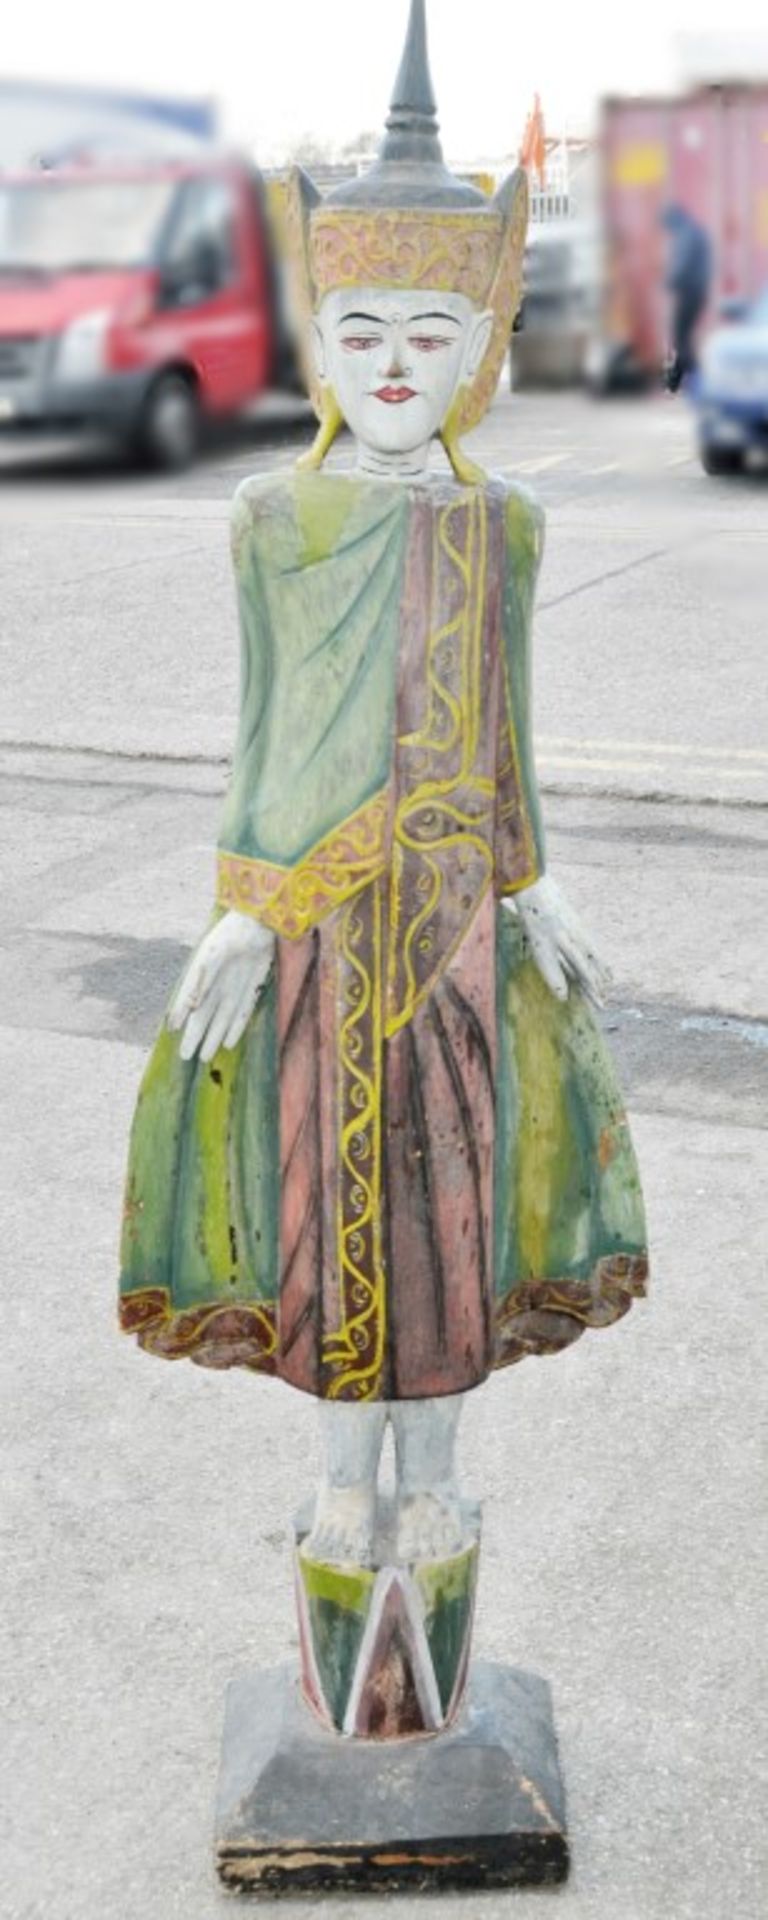 1 x Large Carved Wooden Free-standing Thai Statue – Over 5Ft Tall (169 cm) – Beautifully Hand- - Image 2 of 5